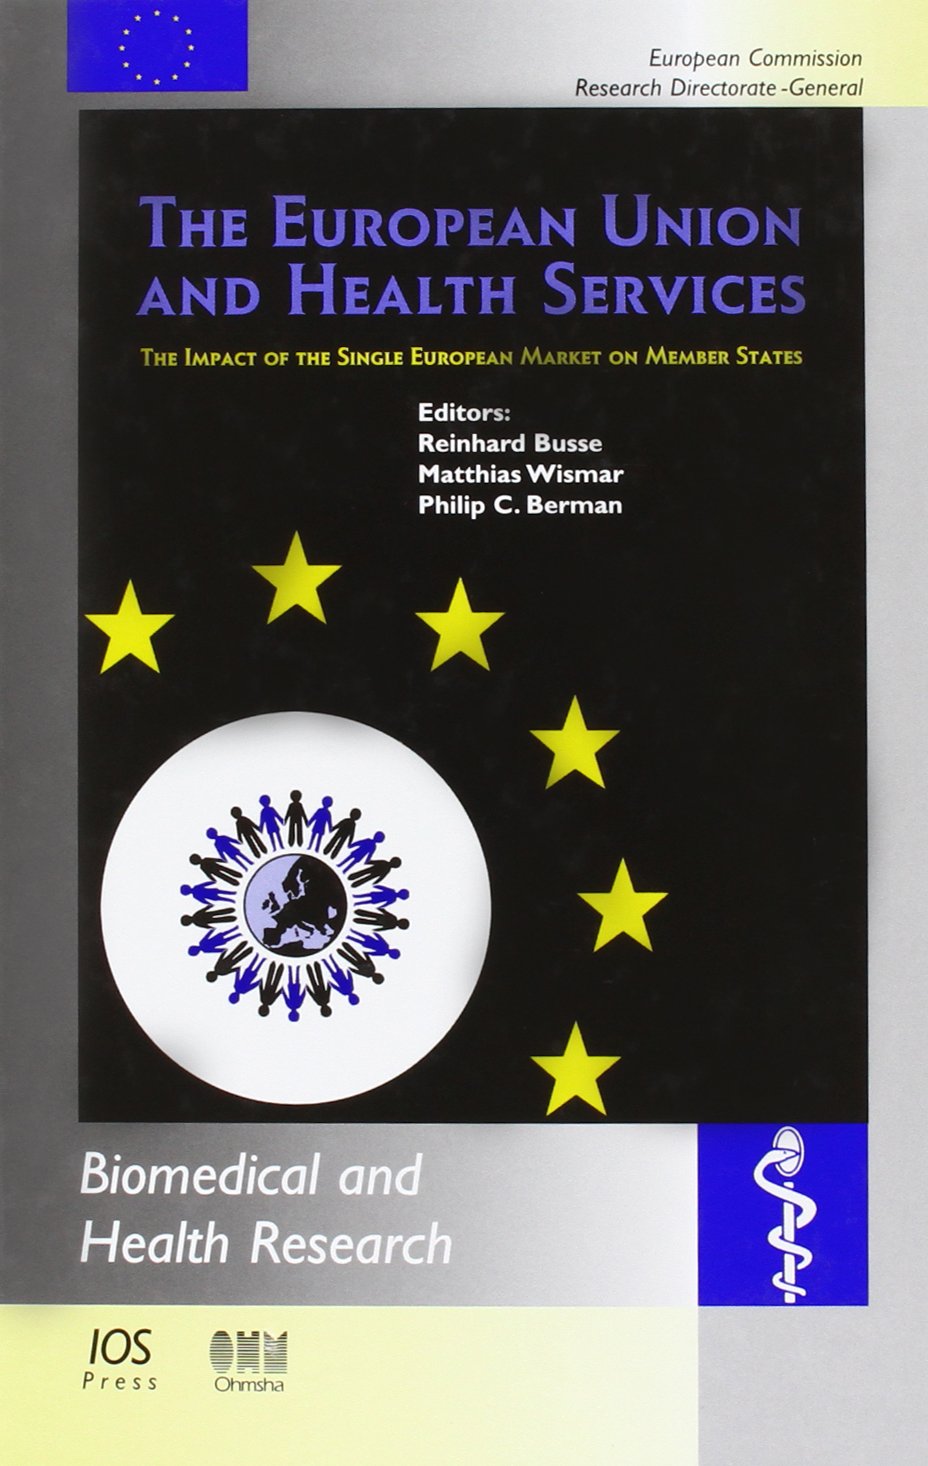 The Impact of the Single European Market on Member States (Biomedical and Health Research)